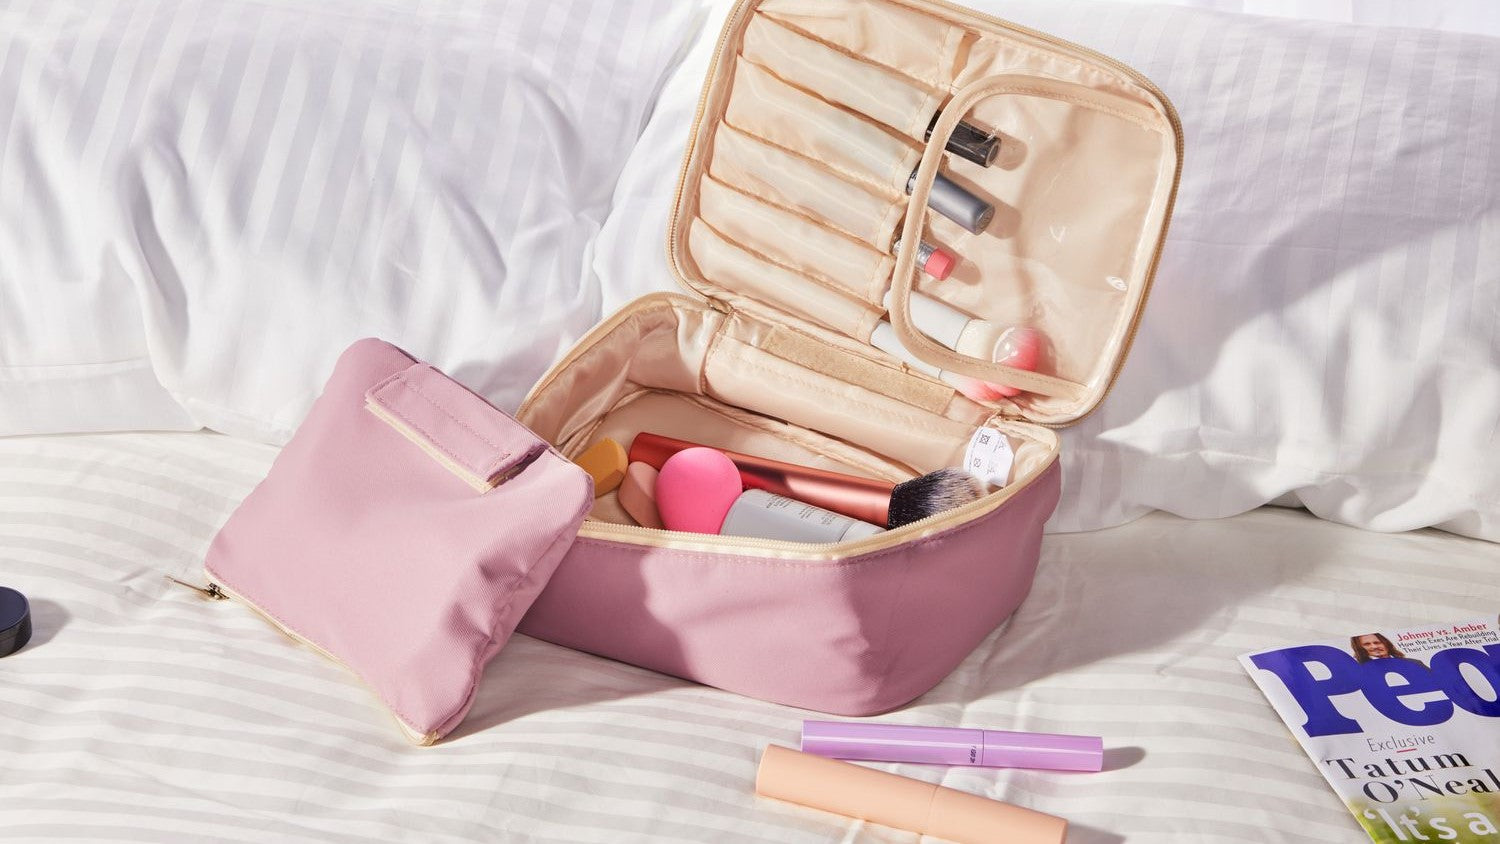 Travel Light, Look Right: Your Makeup Essentials